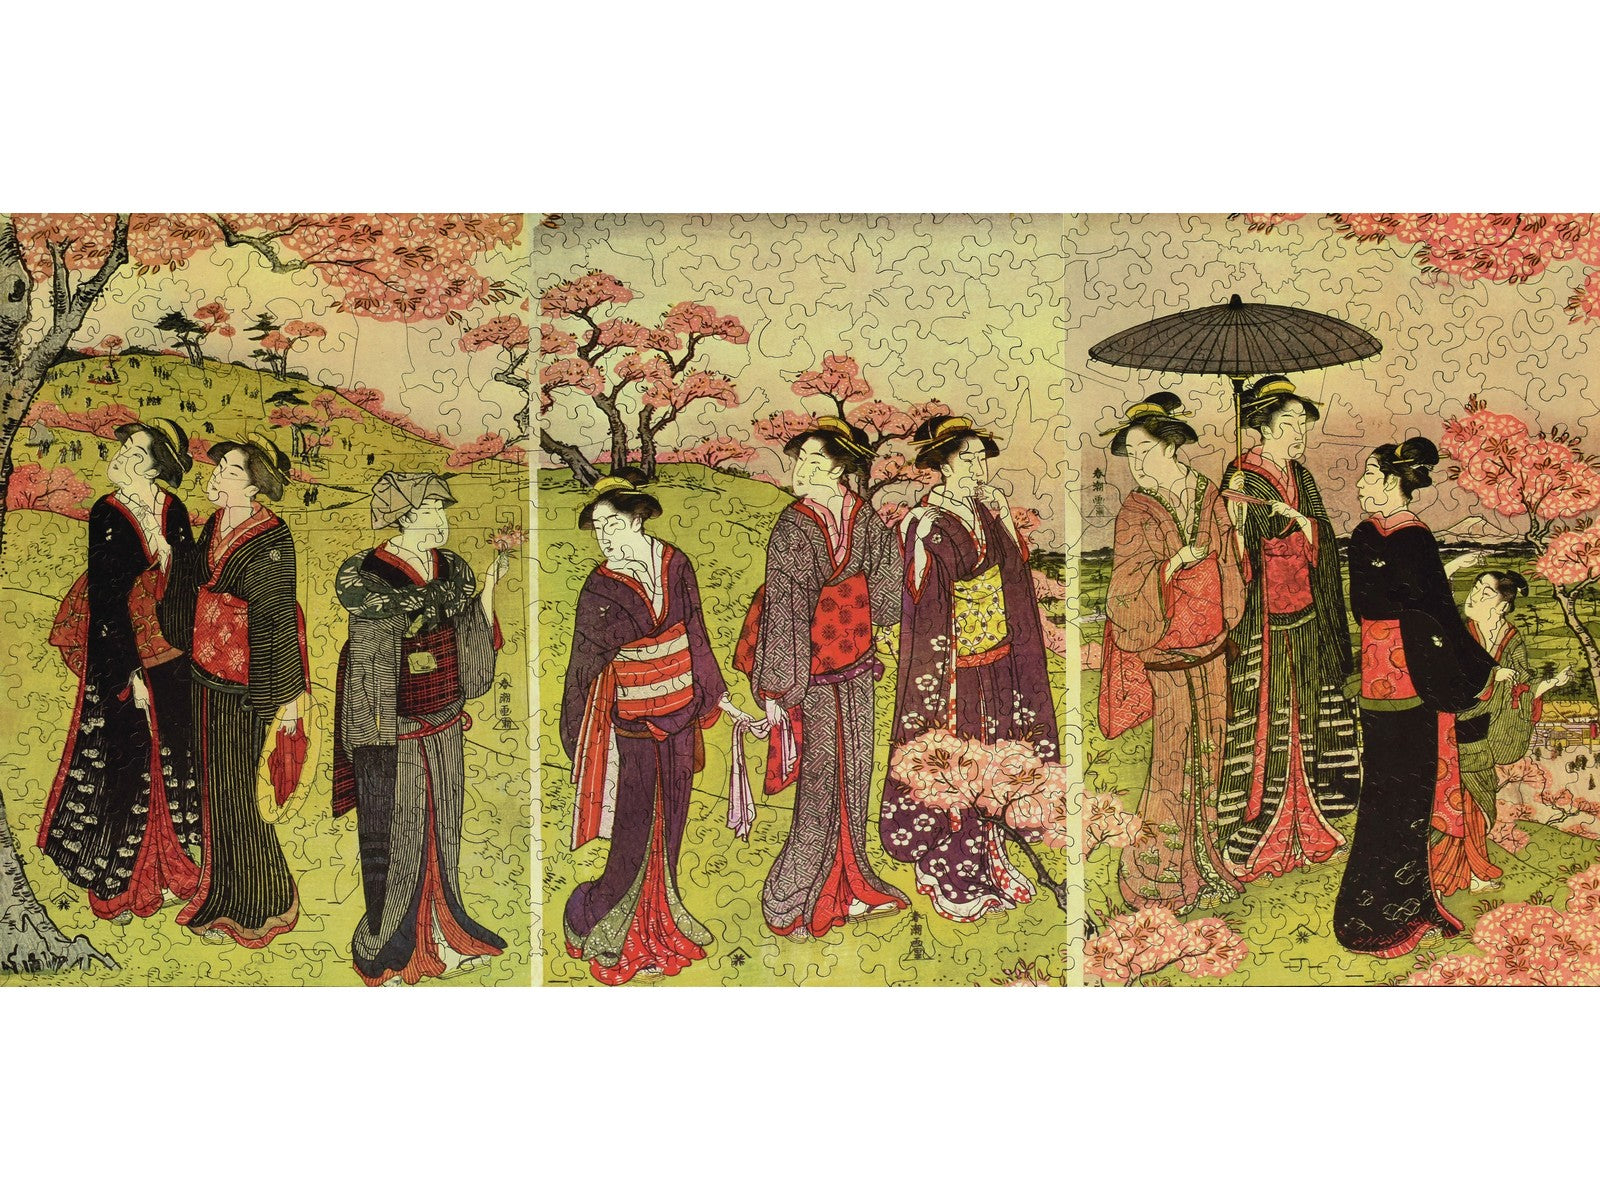 The front of the puzzle, Cherry Blossom Viewing, which shows a Japanese print of people looking at flowering trees.